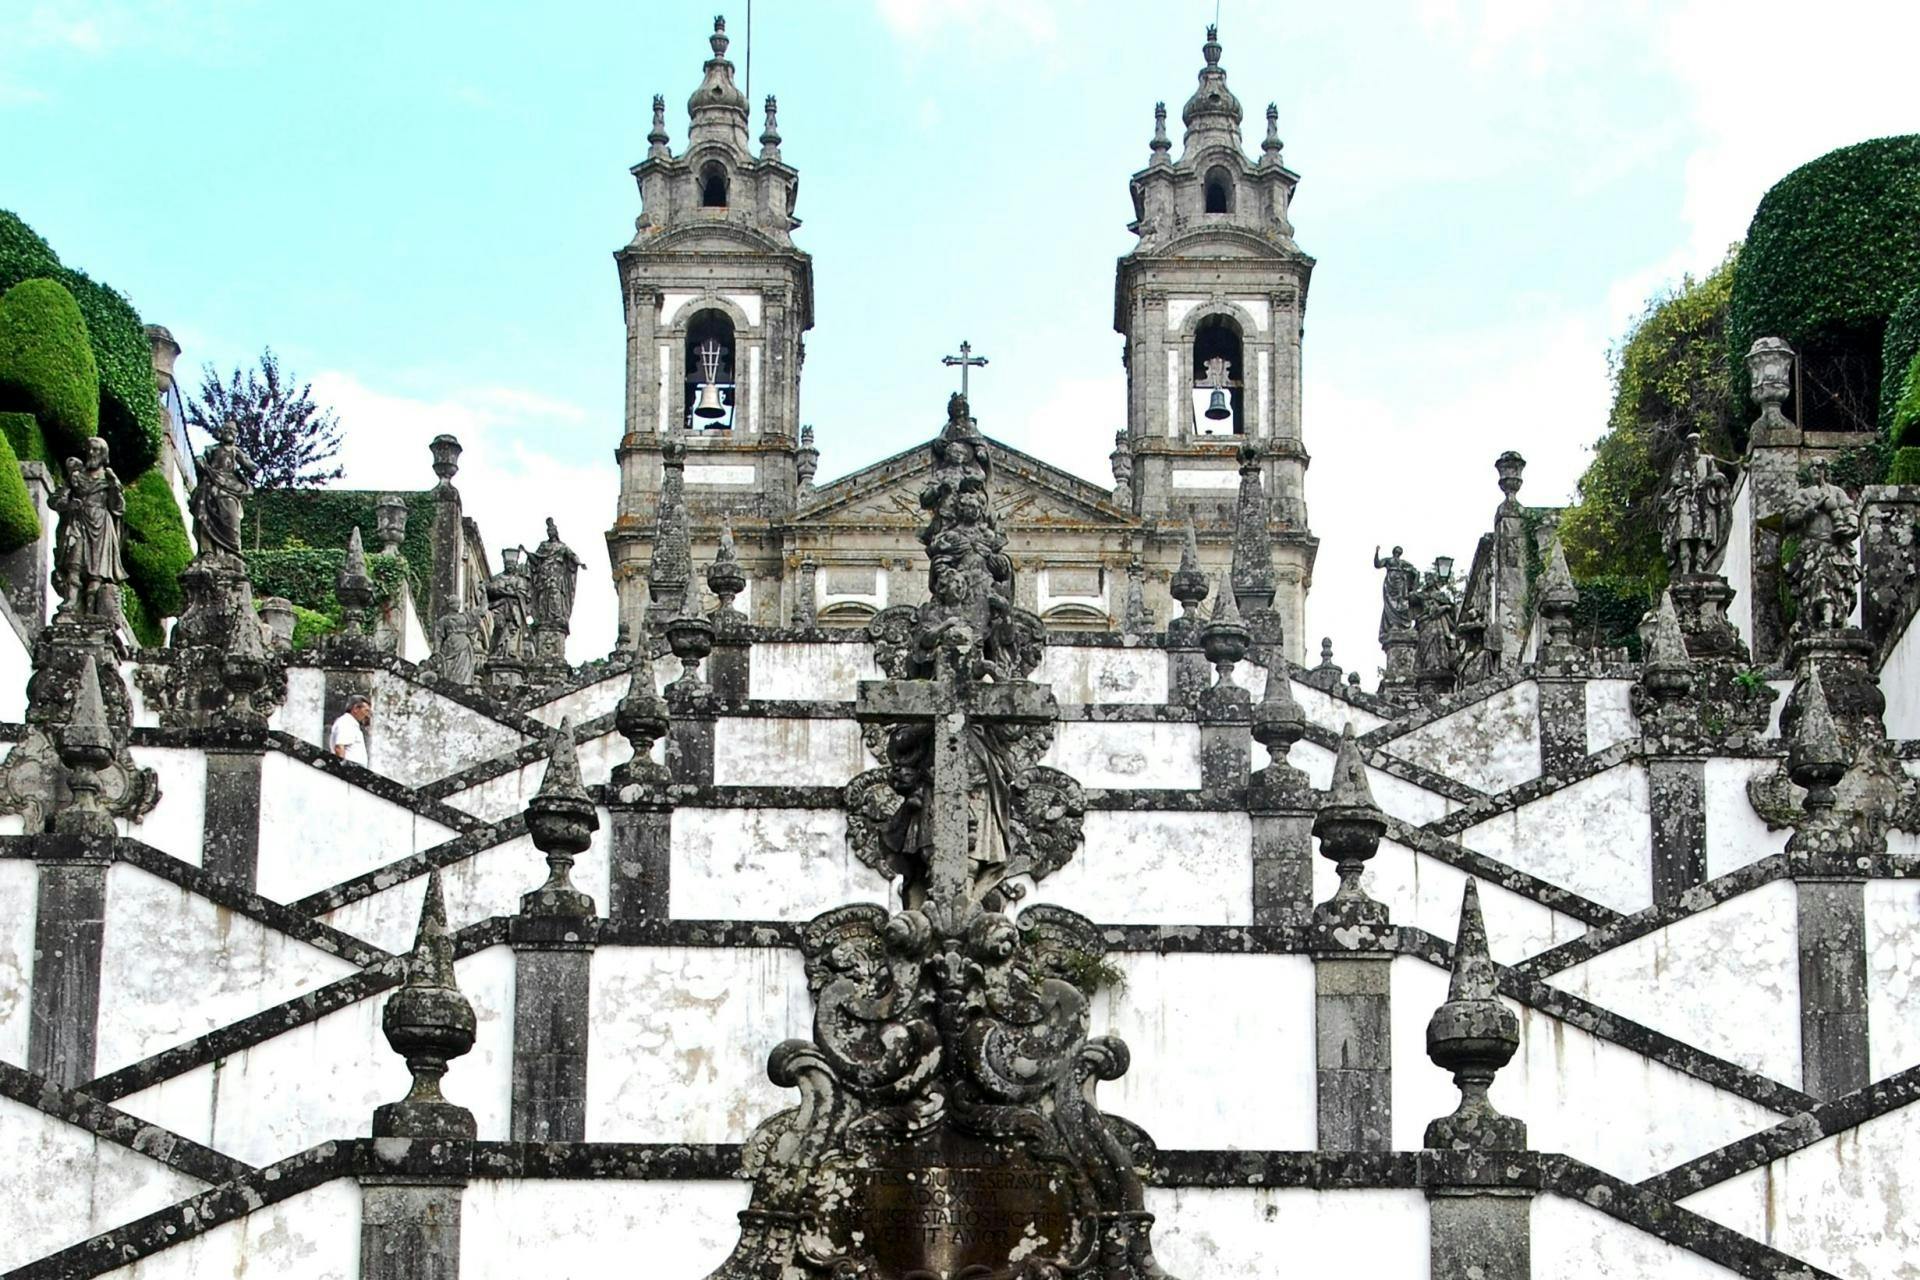 Consider faith, devotion and pilgrimage on your trip through Oporto